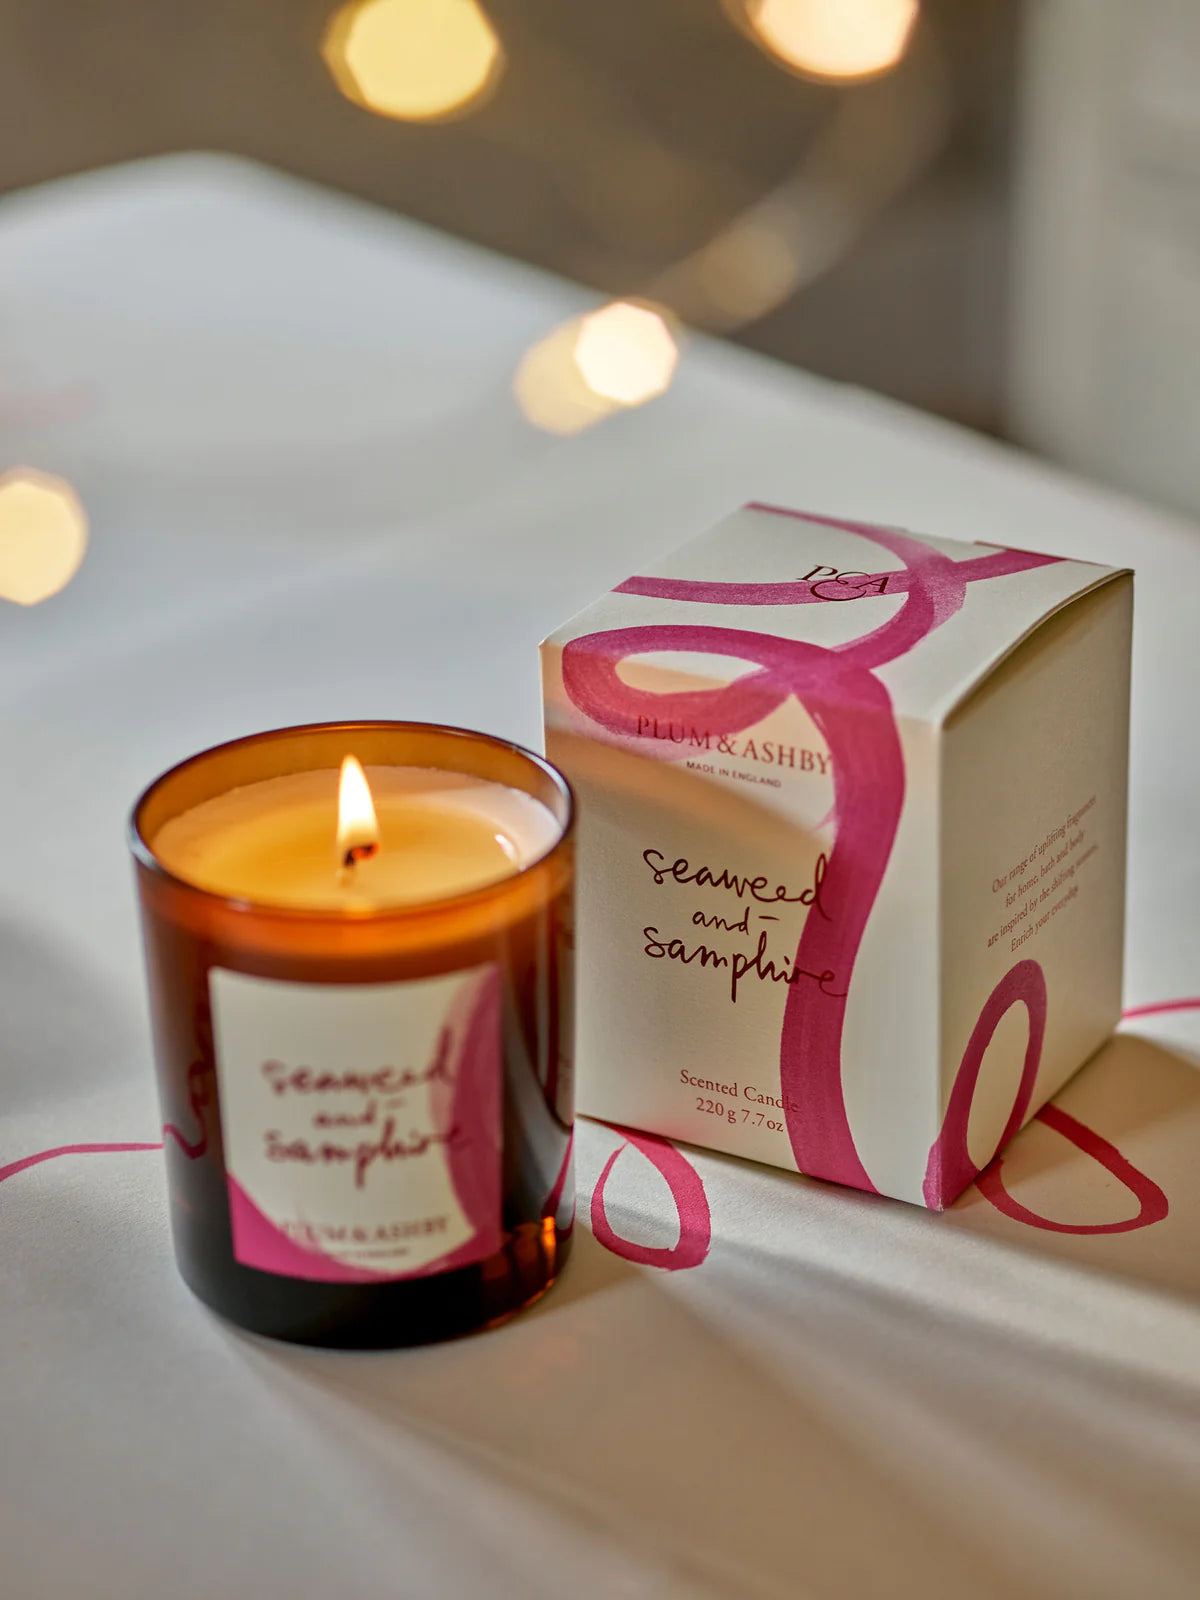 Plum & Ashby Candle | Seaweed & Samphire Candle Plum & Ashby 